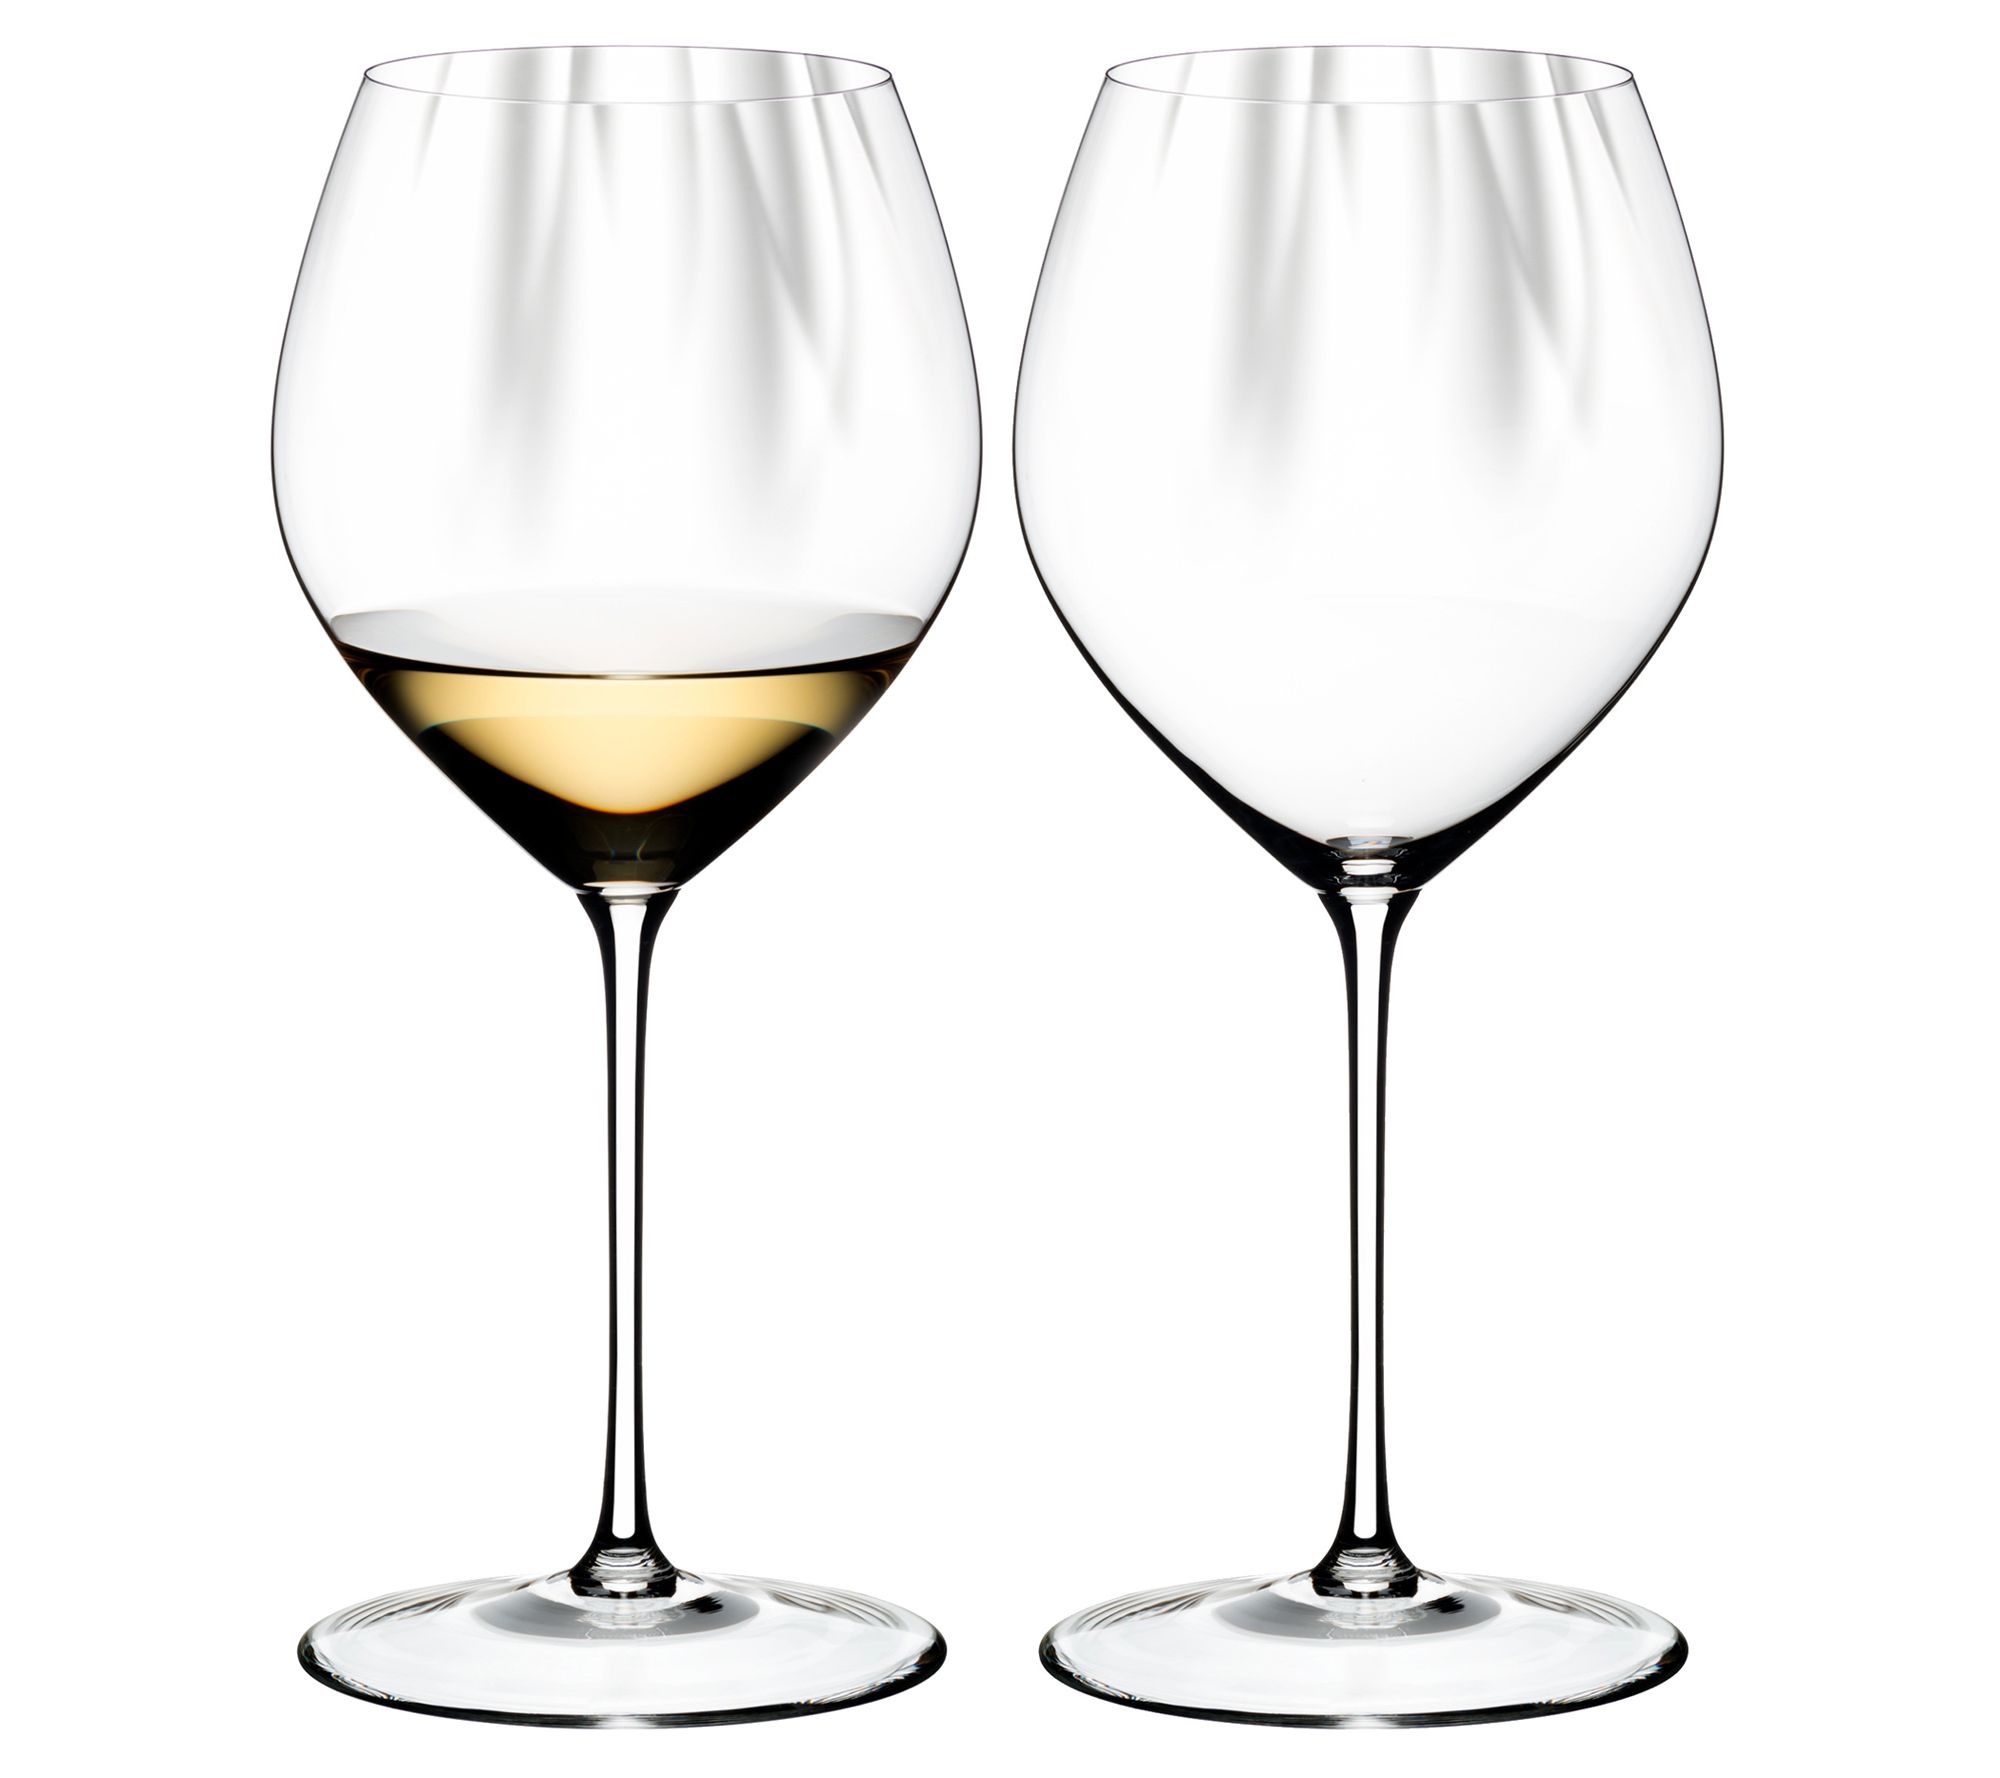 Riedel Stemless, Viognier Chardonnay Wine Glass Set, Clear - 4 count